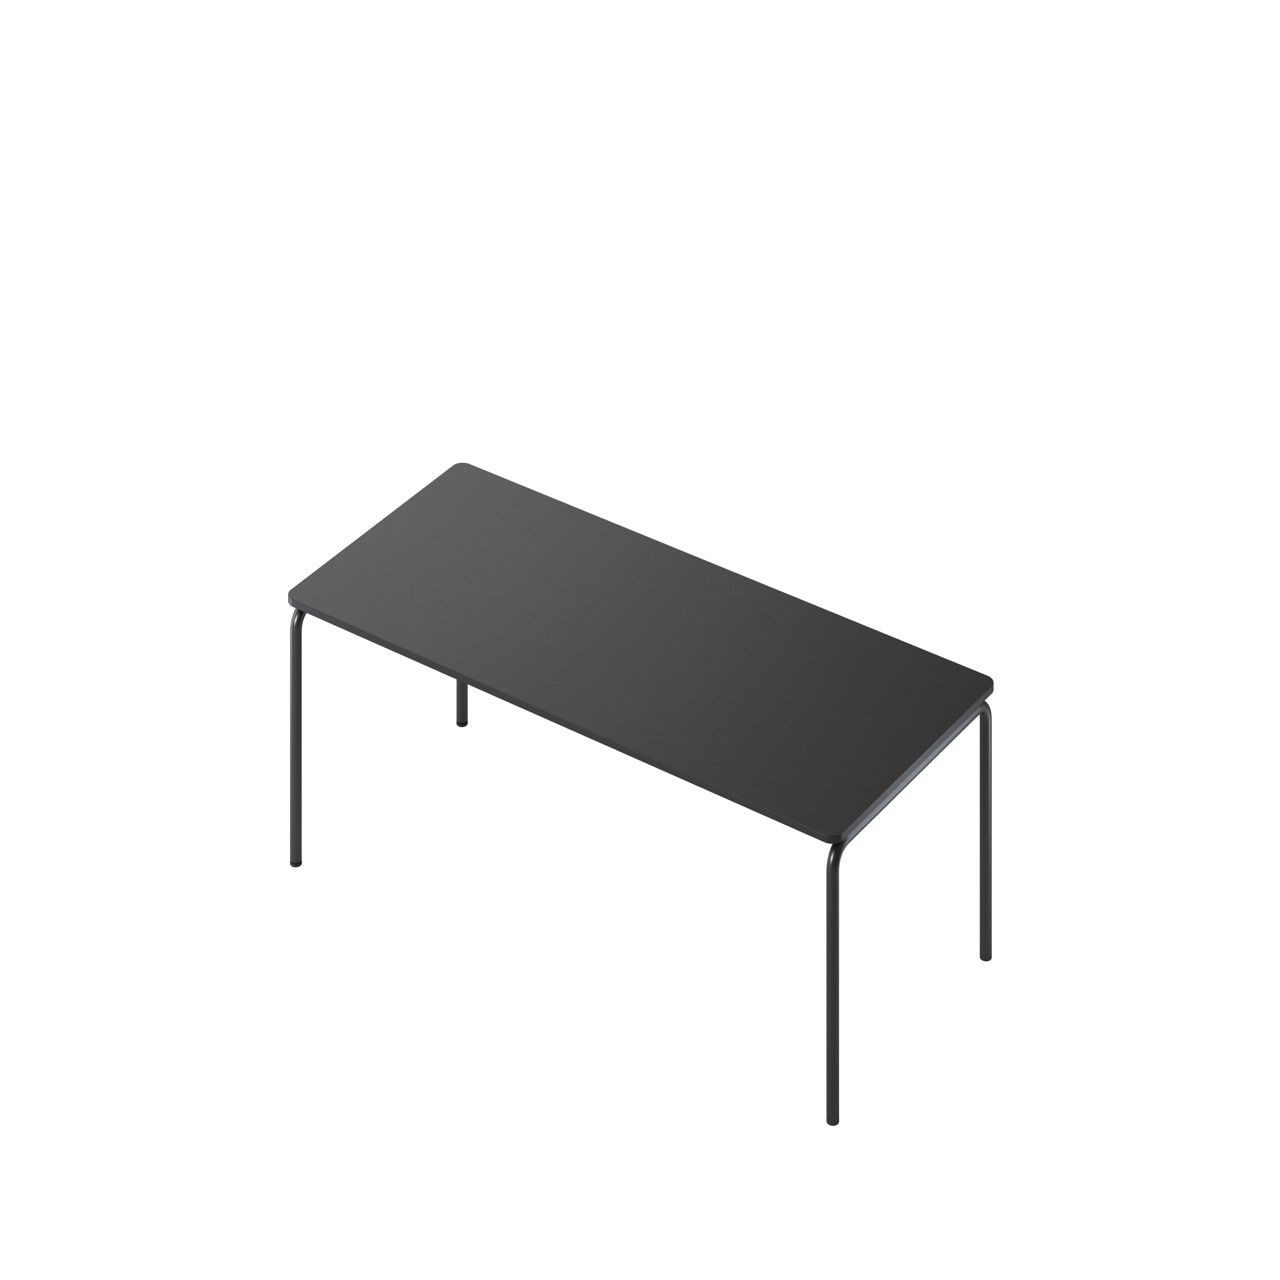 OCEE&FOUR - Tables - FourReal 74 - 180 x 80 - straight - Packshot Image 2 Large